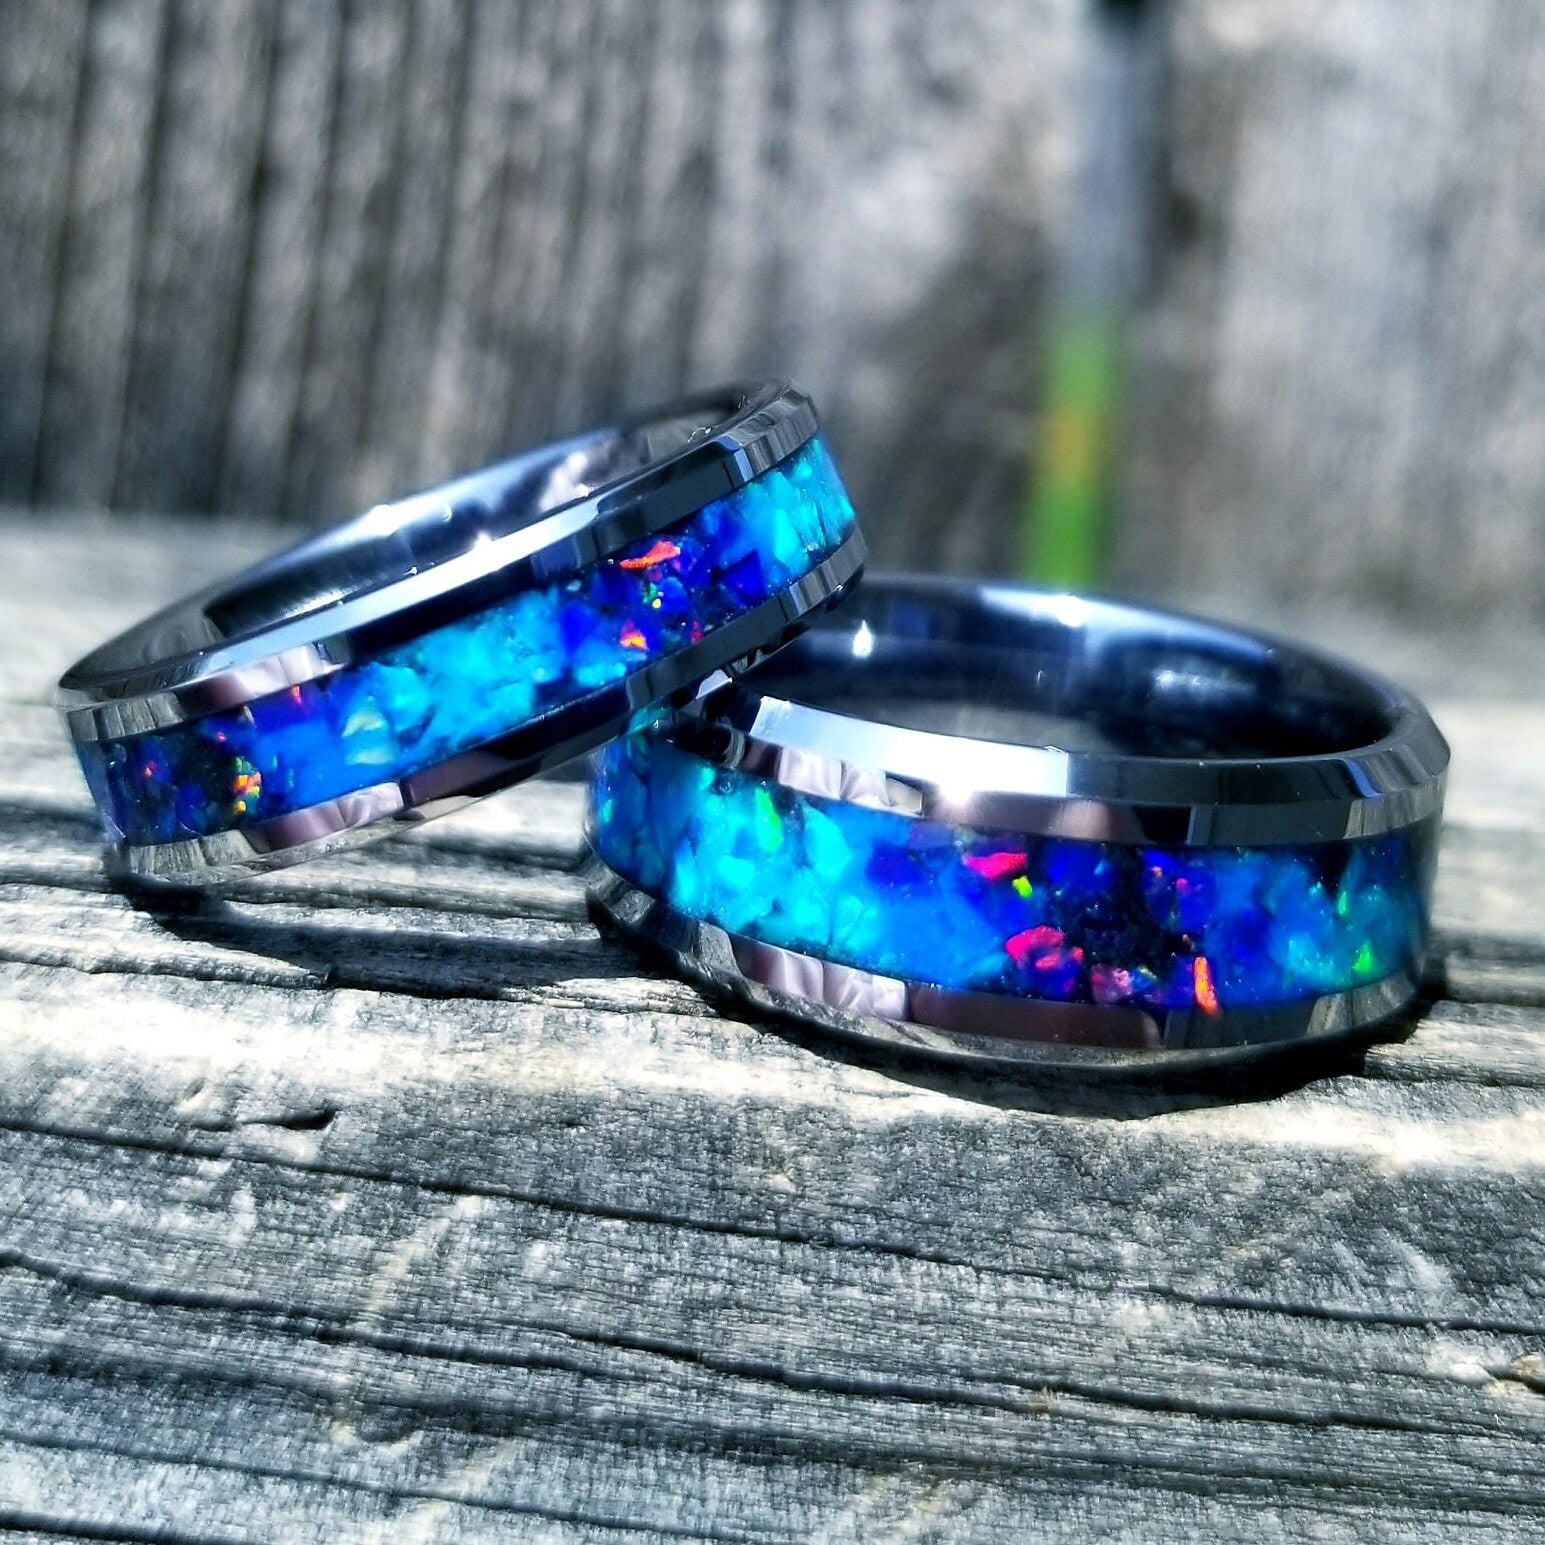 His & Hers Opal Rings - Tungsten Carbide Ring Set with Red Fire Opal & Glowstone Inlay - 8mm & 6mm Rings - Sizes 5-13 - Orth Custom Rings